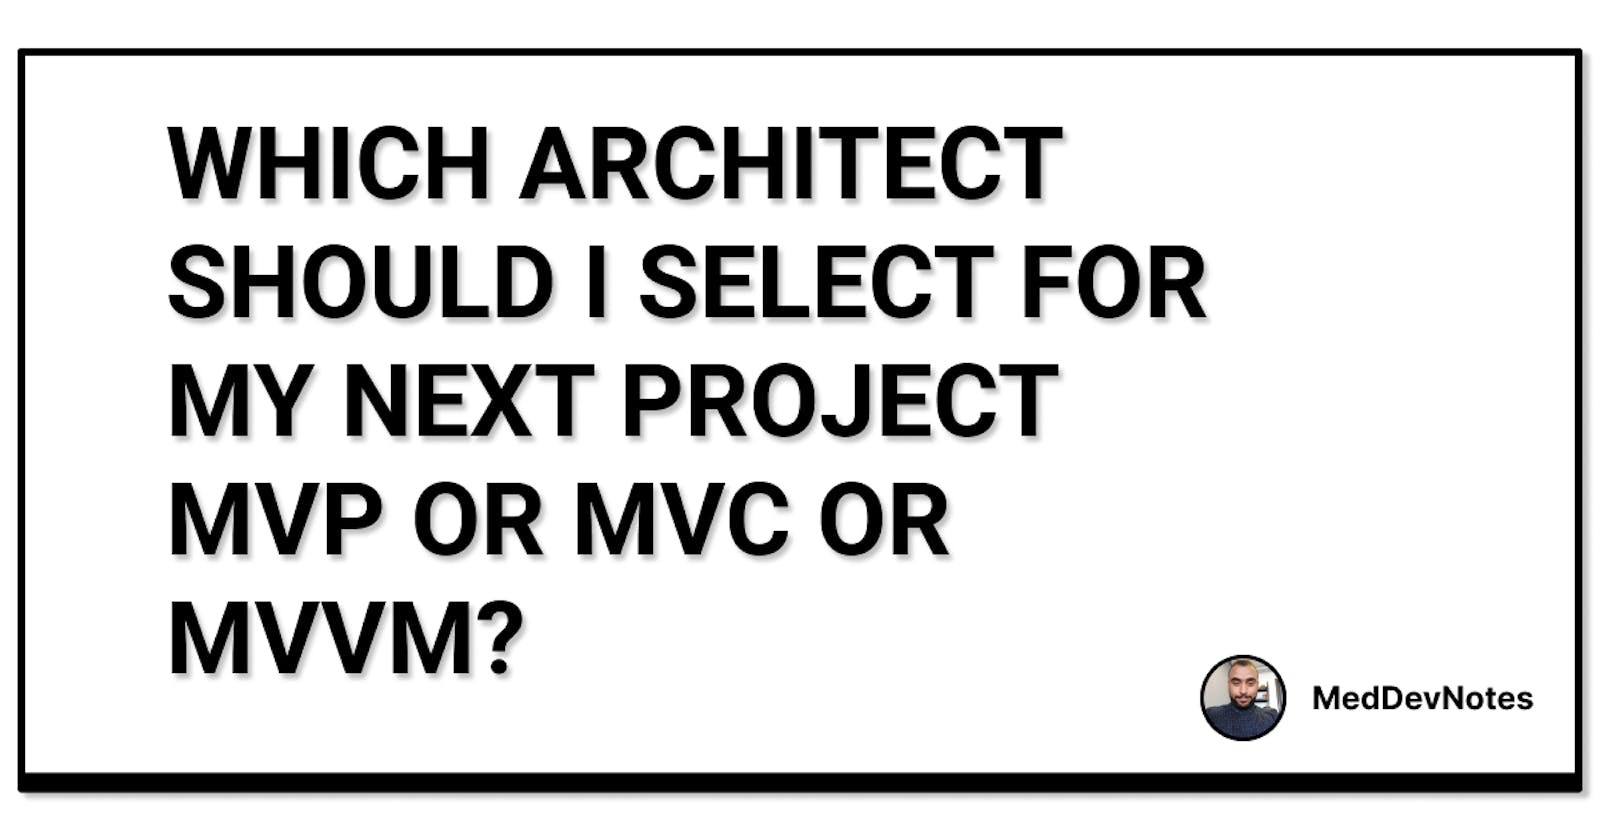 Which architect should I select for my next Project MVP or MVC or MVVM?